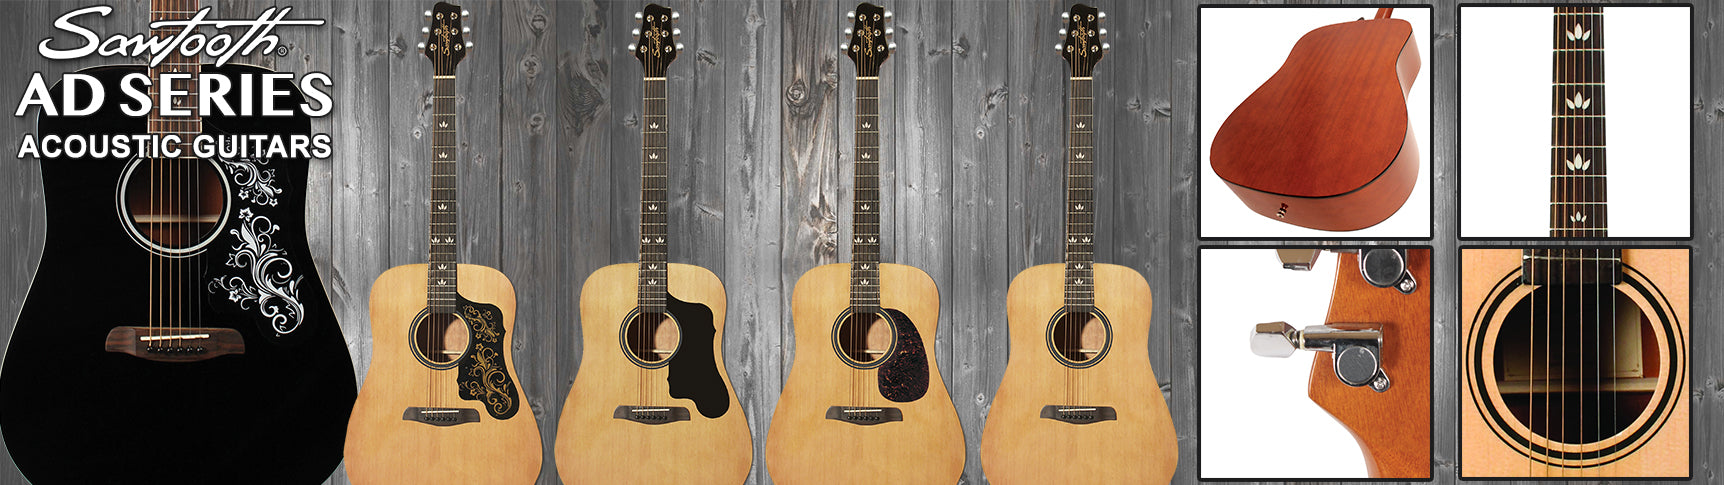 Sawtooth Acoustic Dreadnought